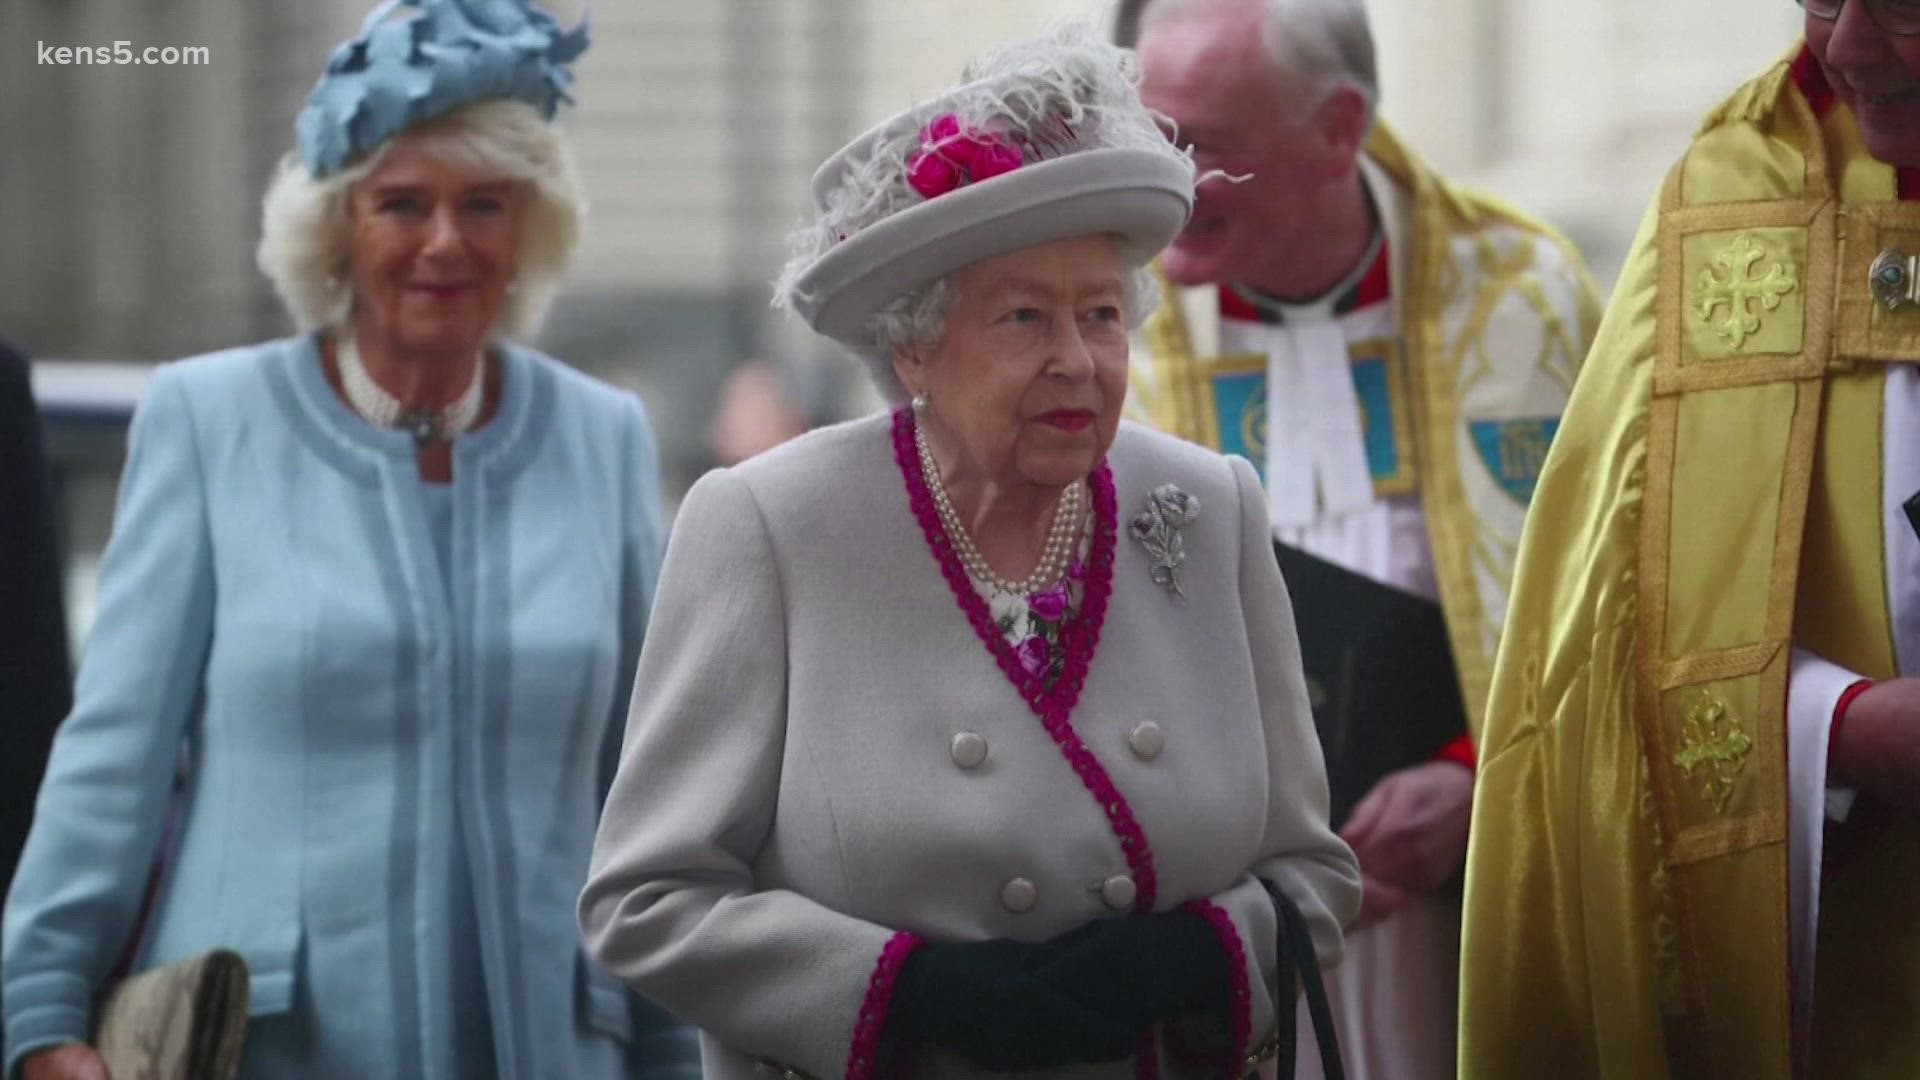 Buckingham Palace said the 95-year-old British monarch is experiencing mild, cold-like symptoms.